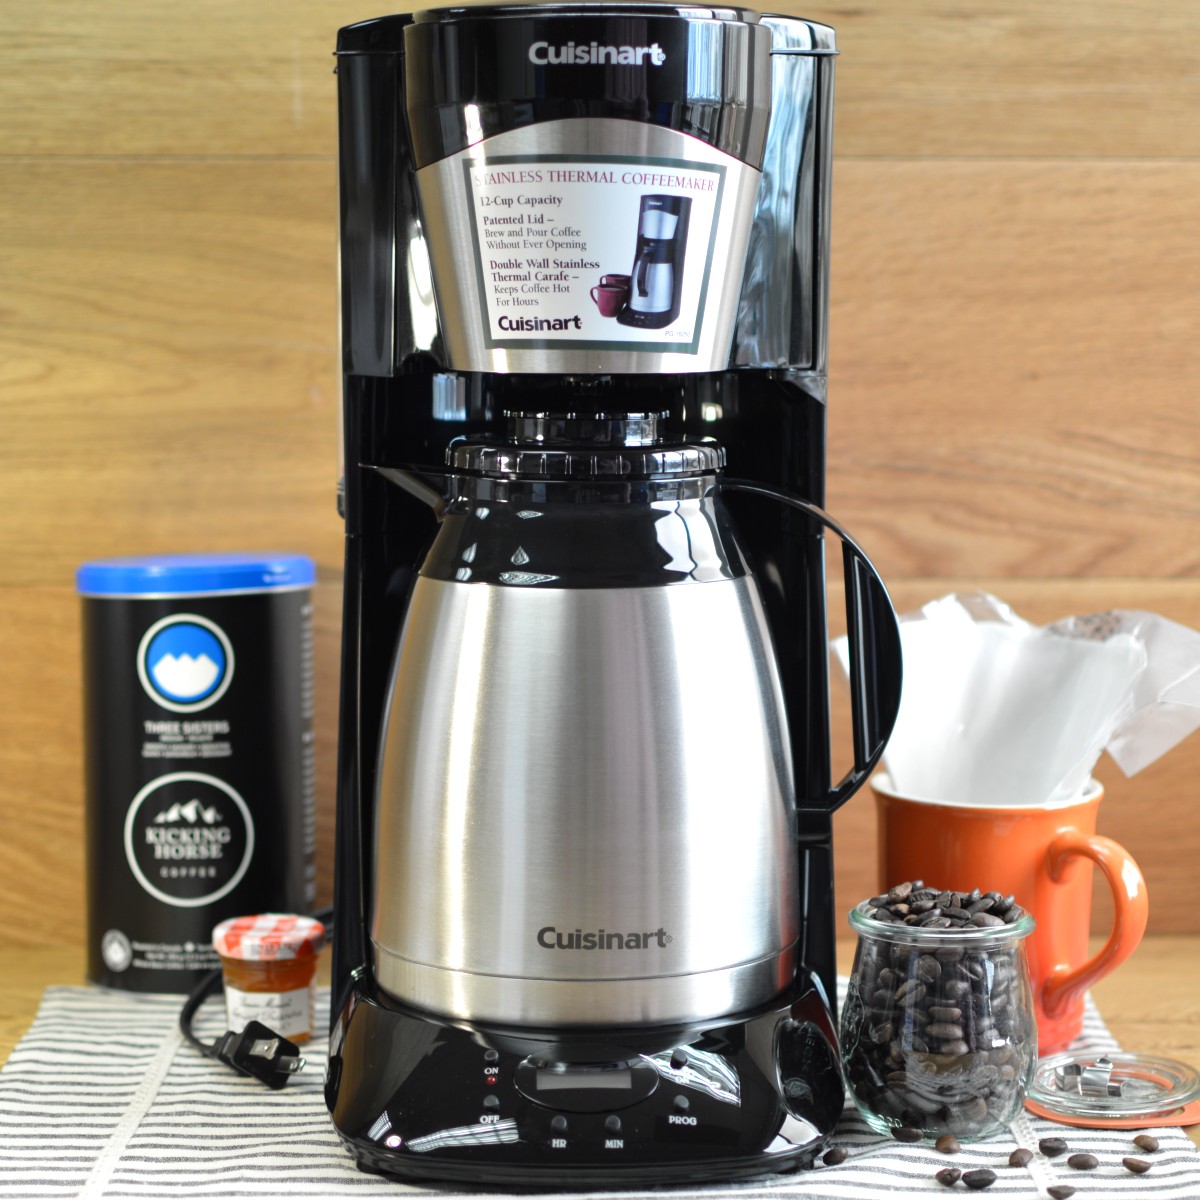 Cuisinart coffee maker review: Great, but not for everyone